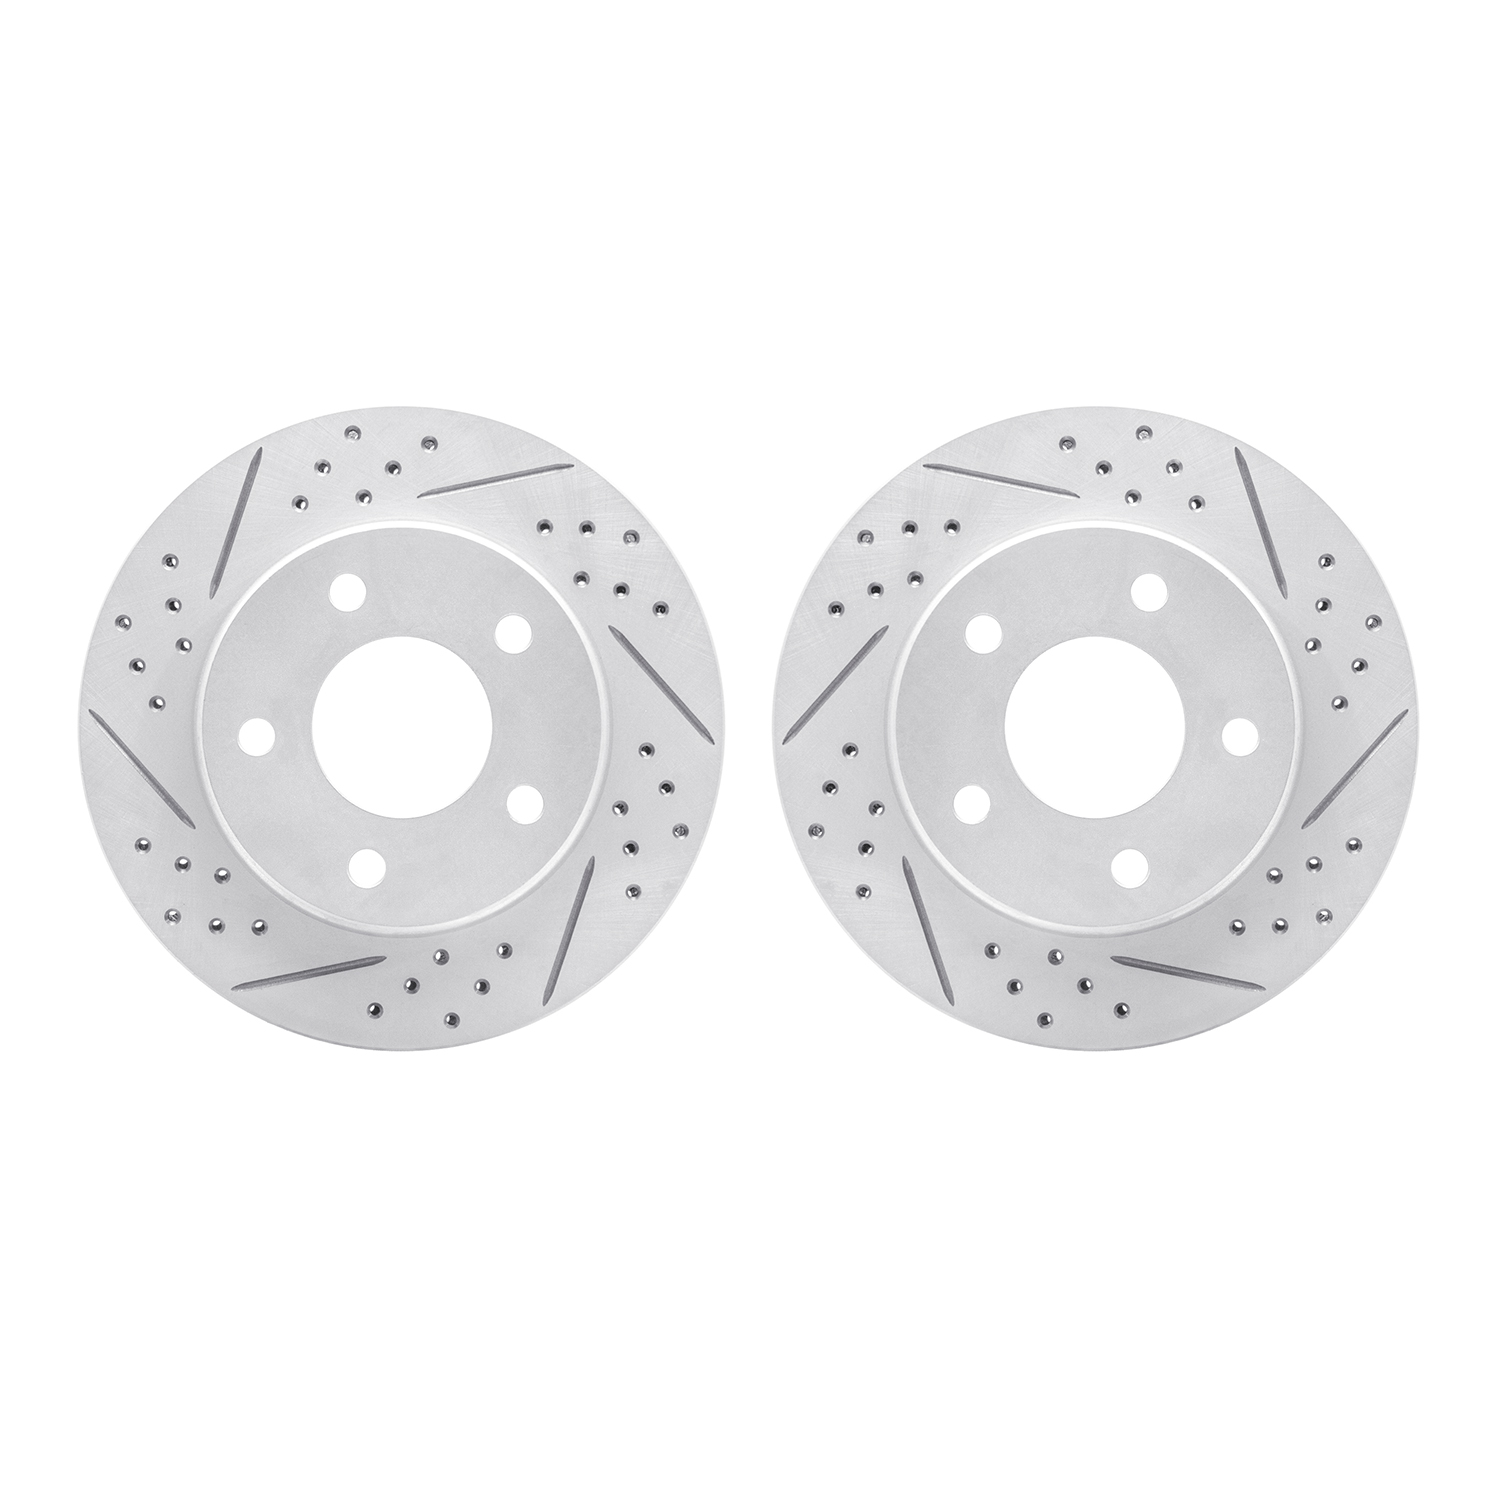 2002-45001 Geoperformance Drilled/Slotted Brake Rotors, 1983-1996 GM, Position: Front